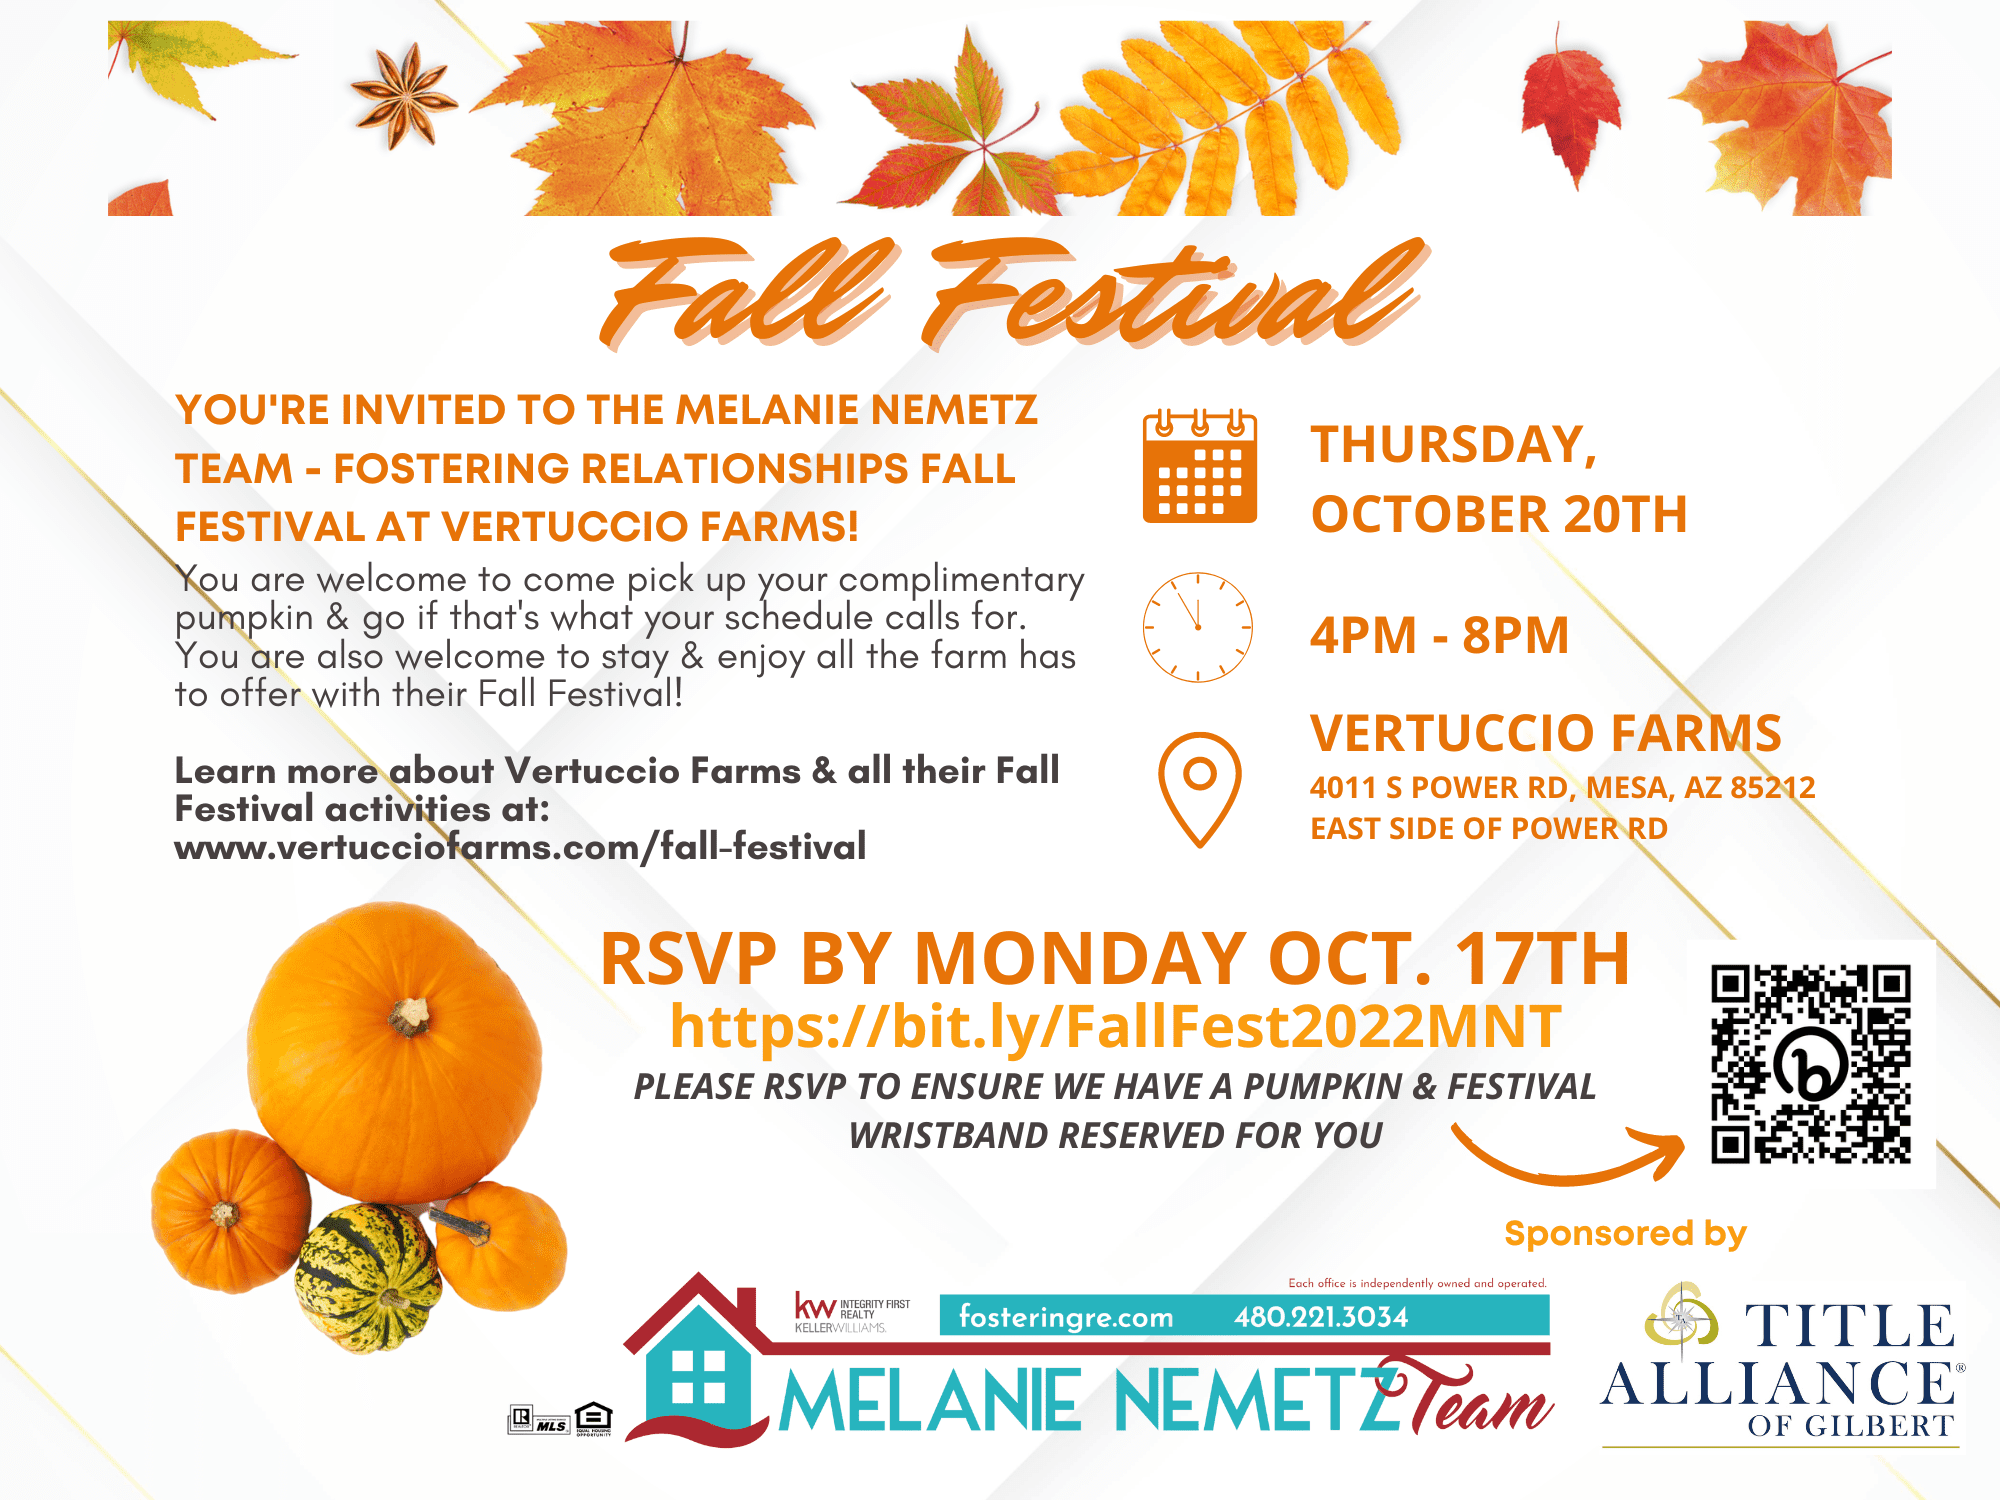 _Fall Festival 2022 Email invite with Title alliance logo